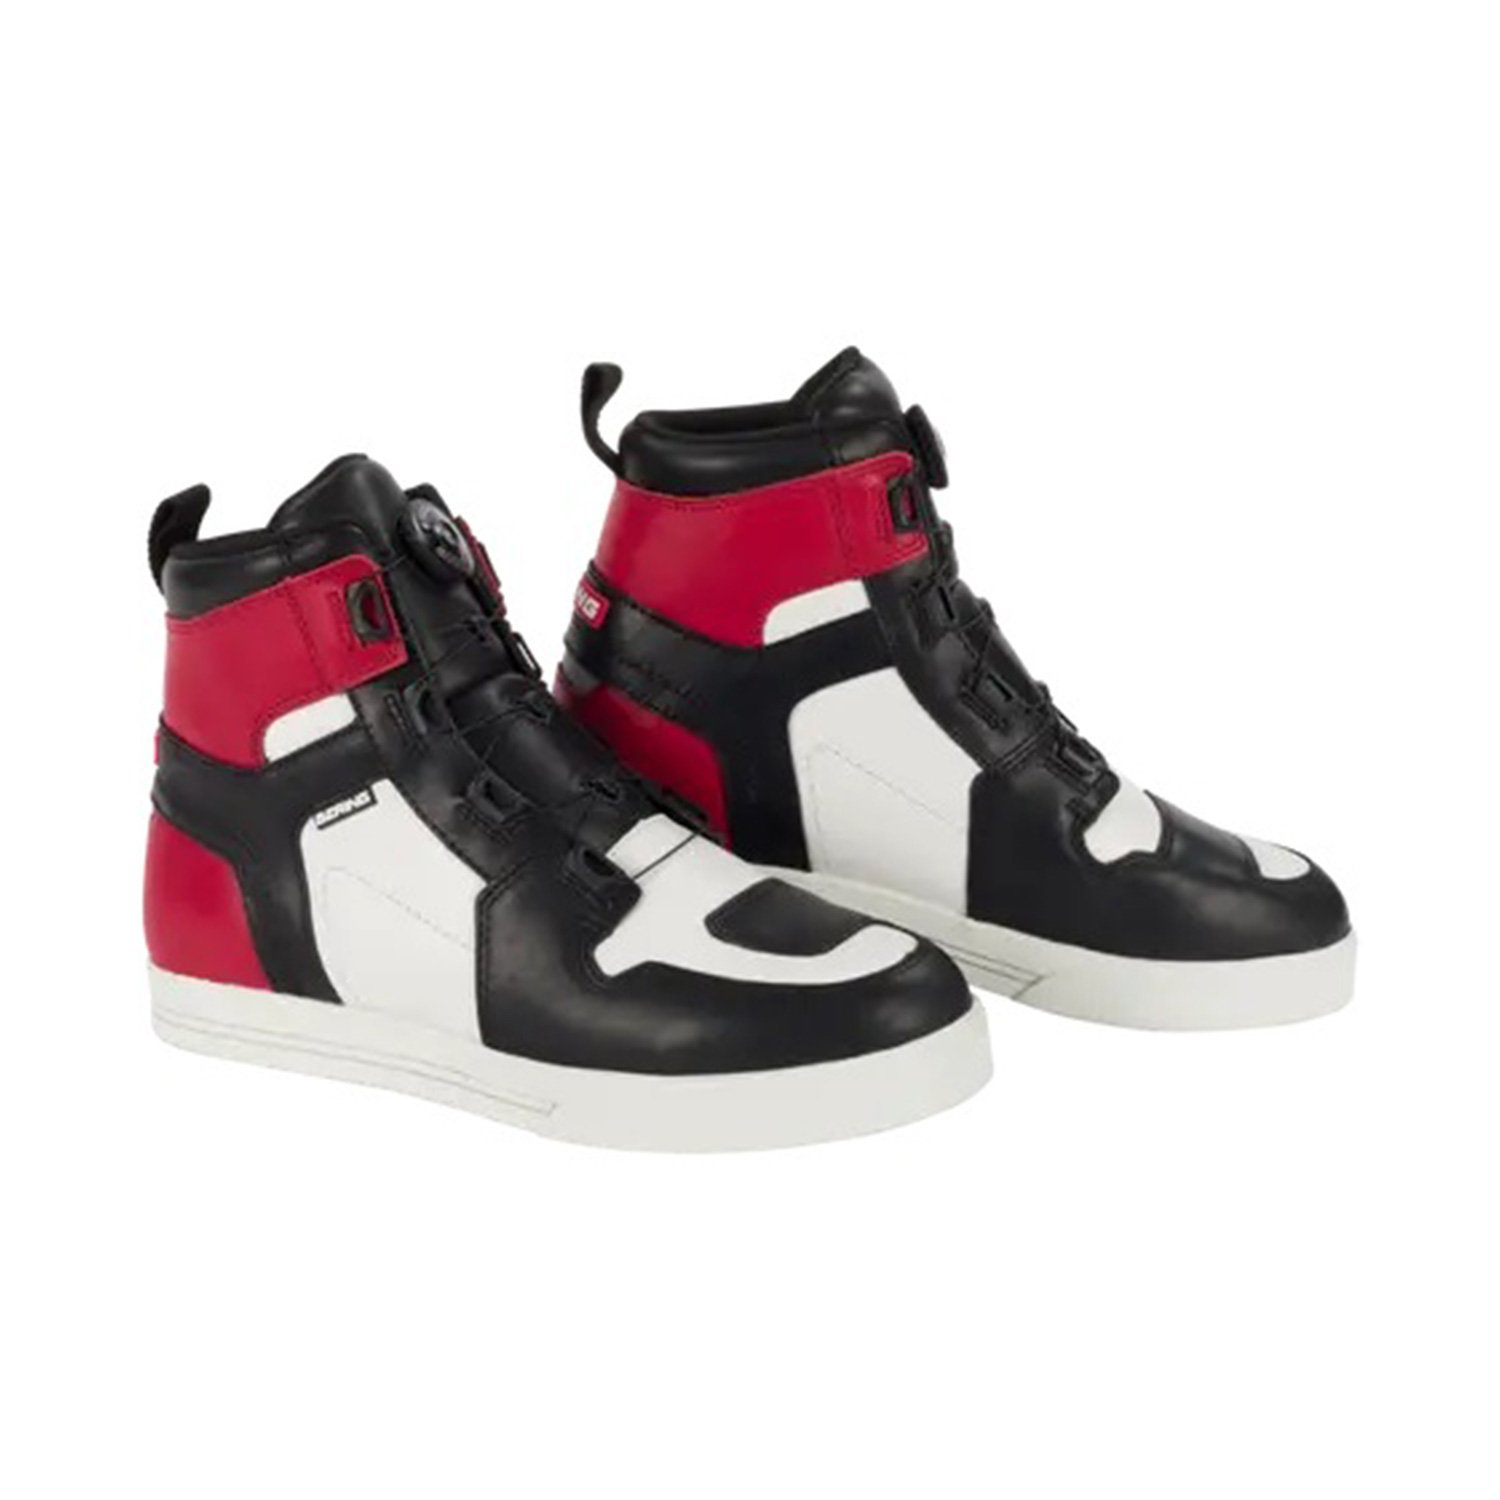 Image of Bering Sneakers Reflex A-Top Black White Red Size 43 ID 3660815176696